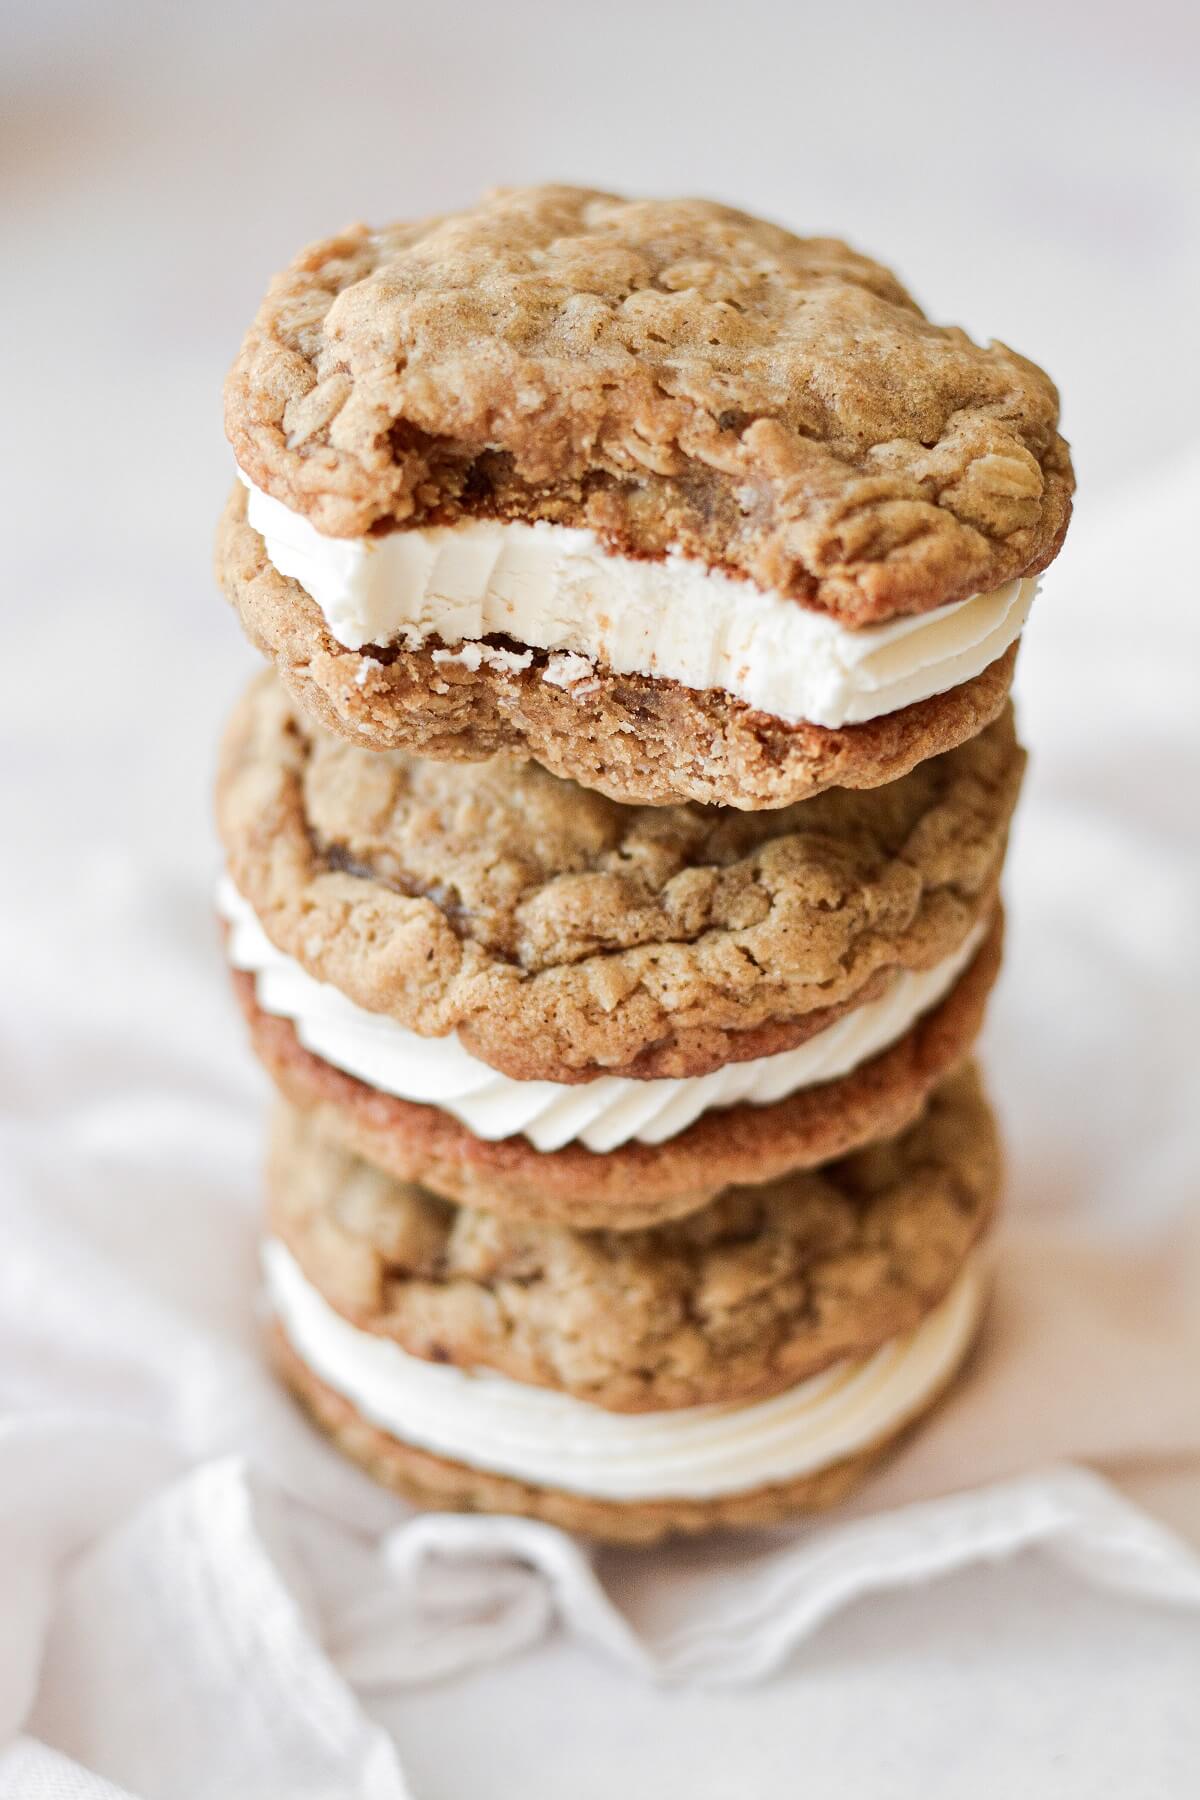 Homemade oatmeal cream pies, one with a bite taken.